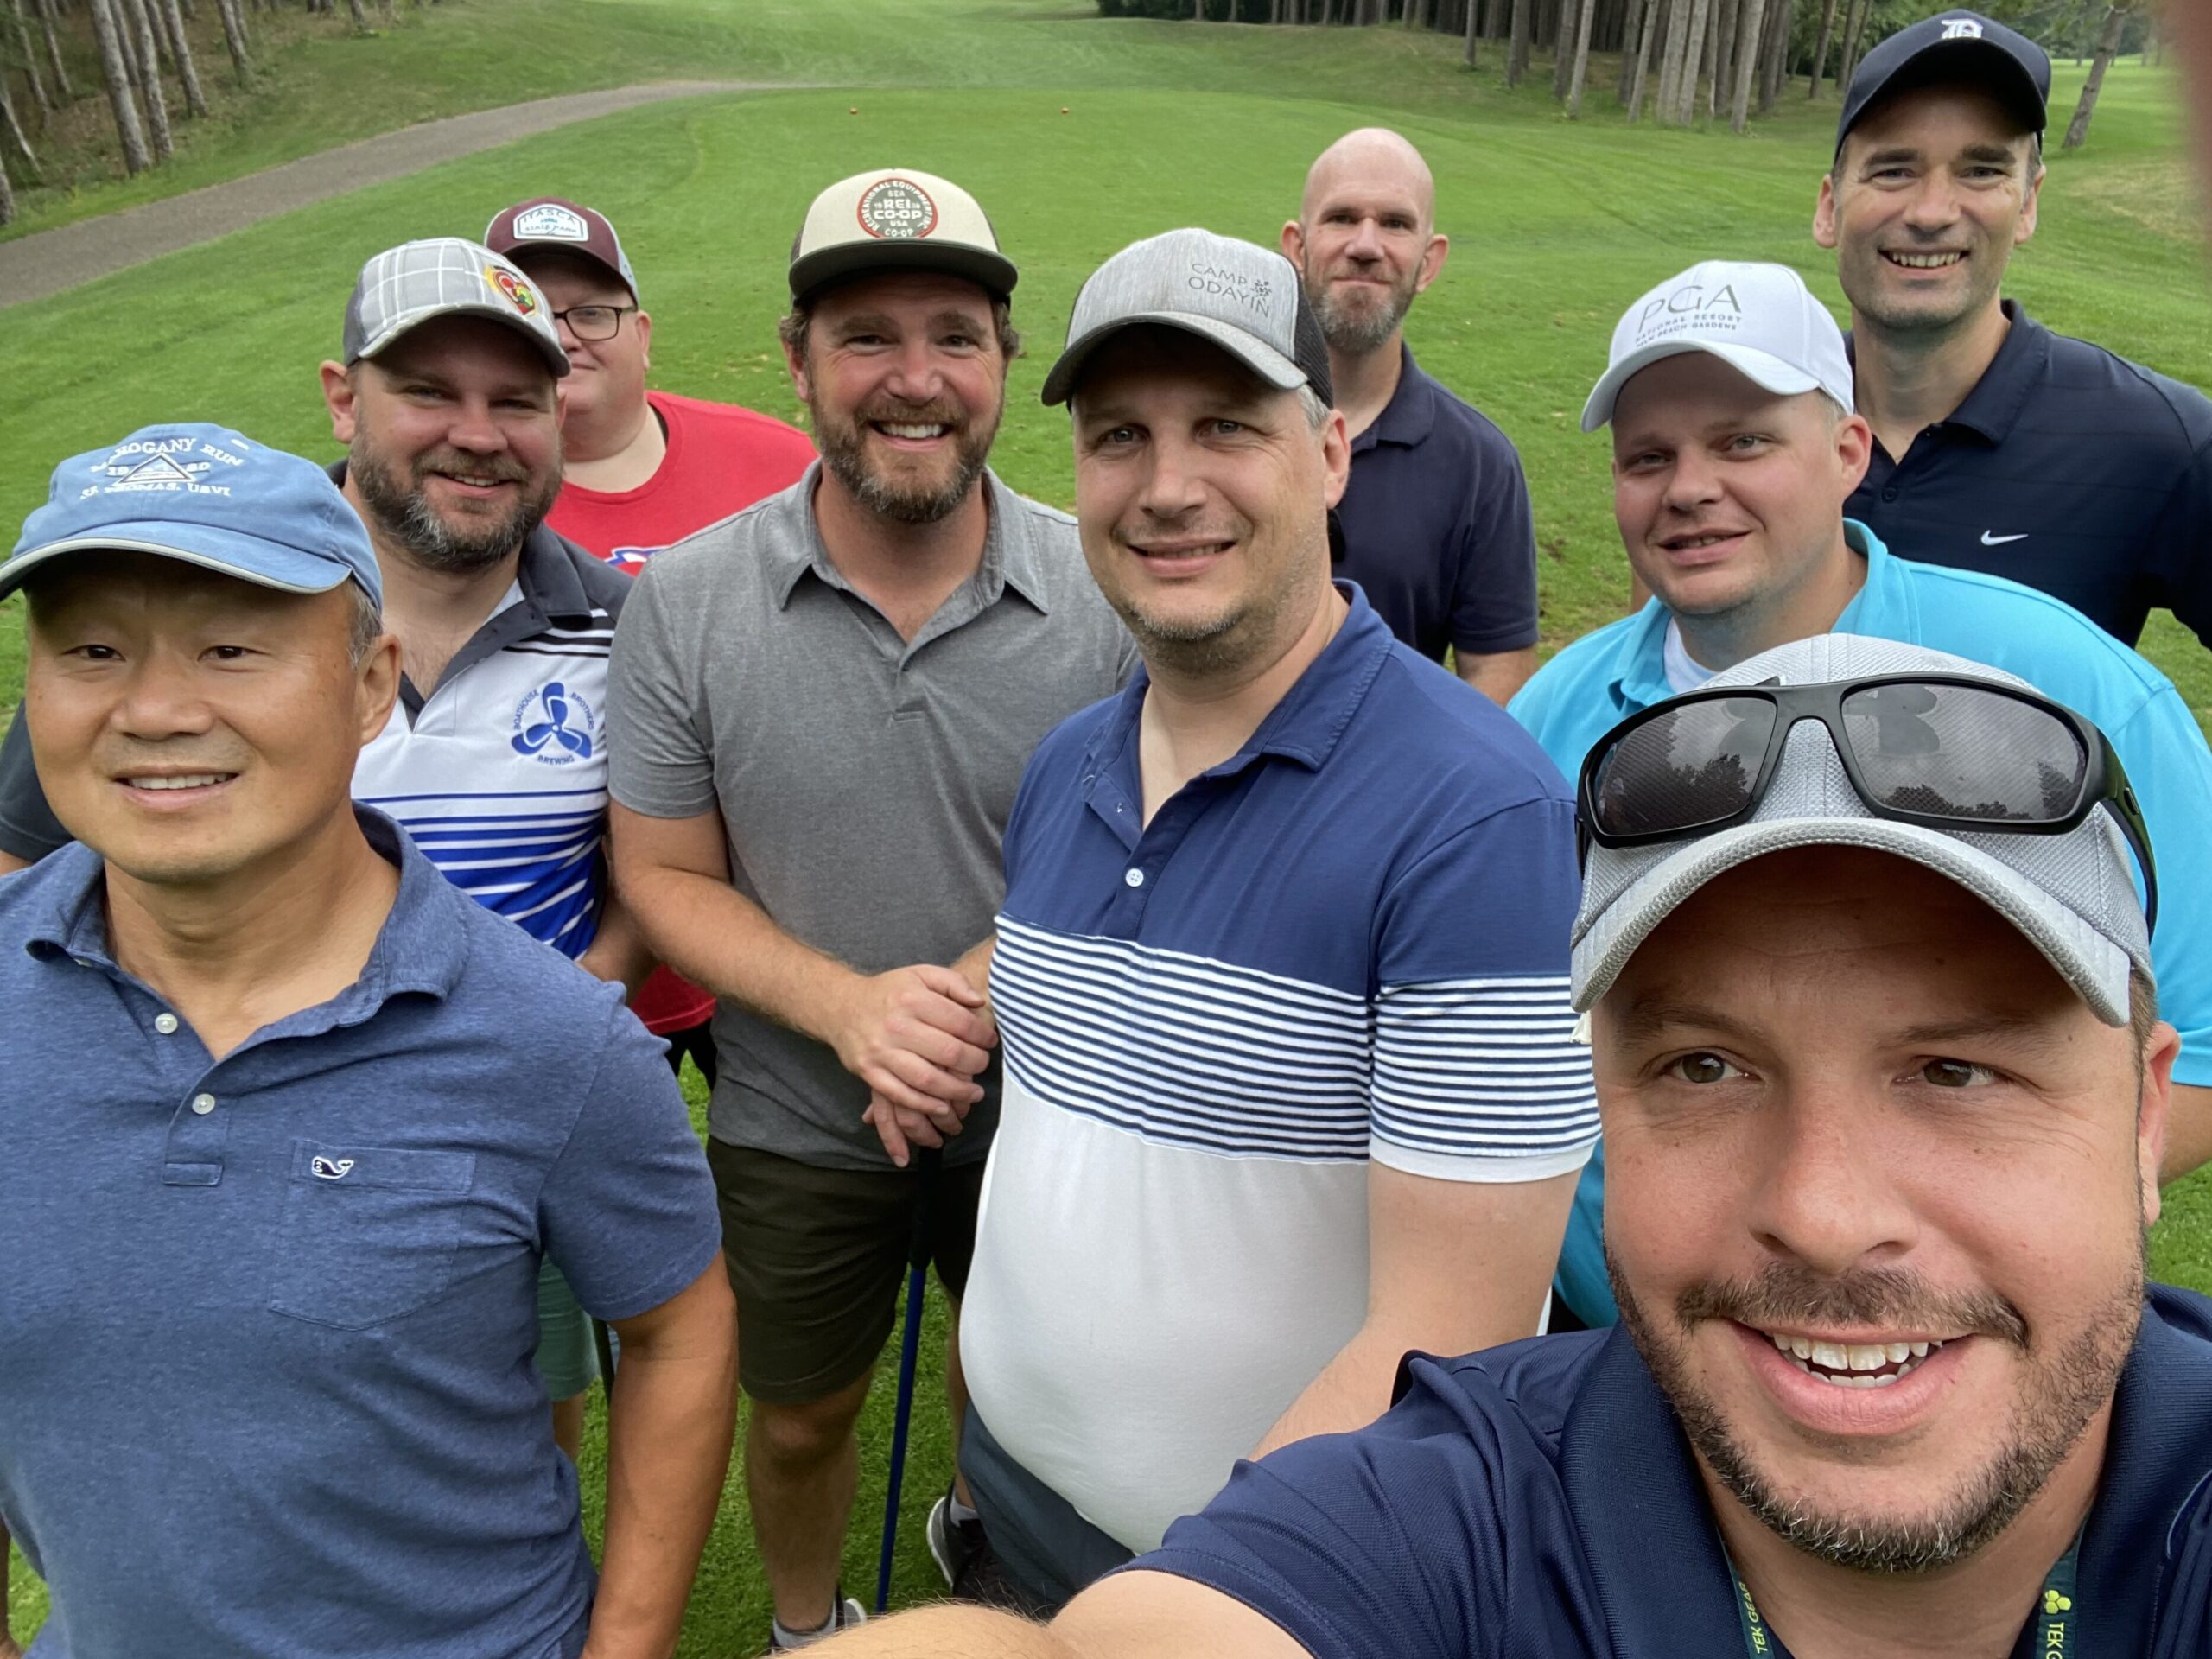 A group of Dads Day participants gathered together on a golf course